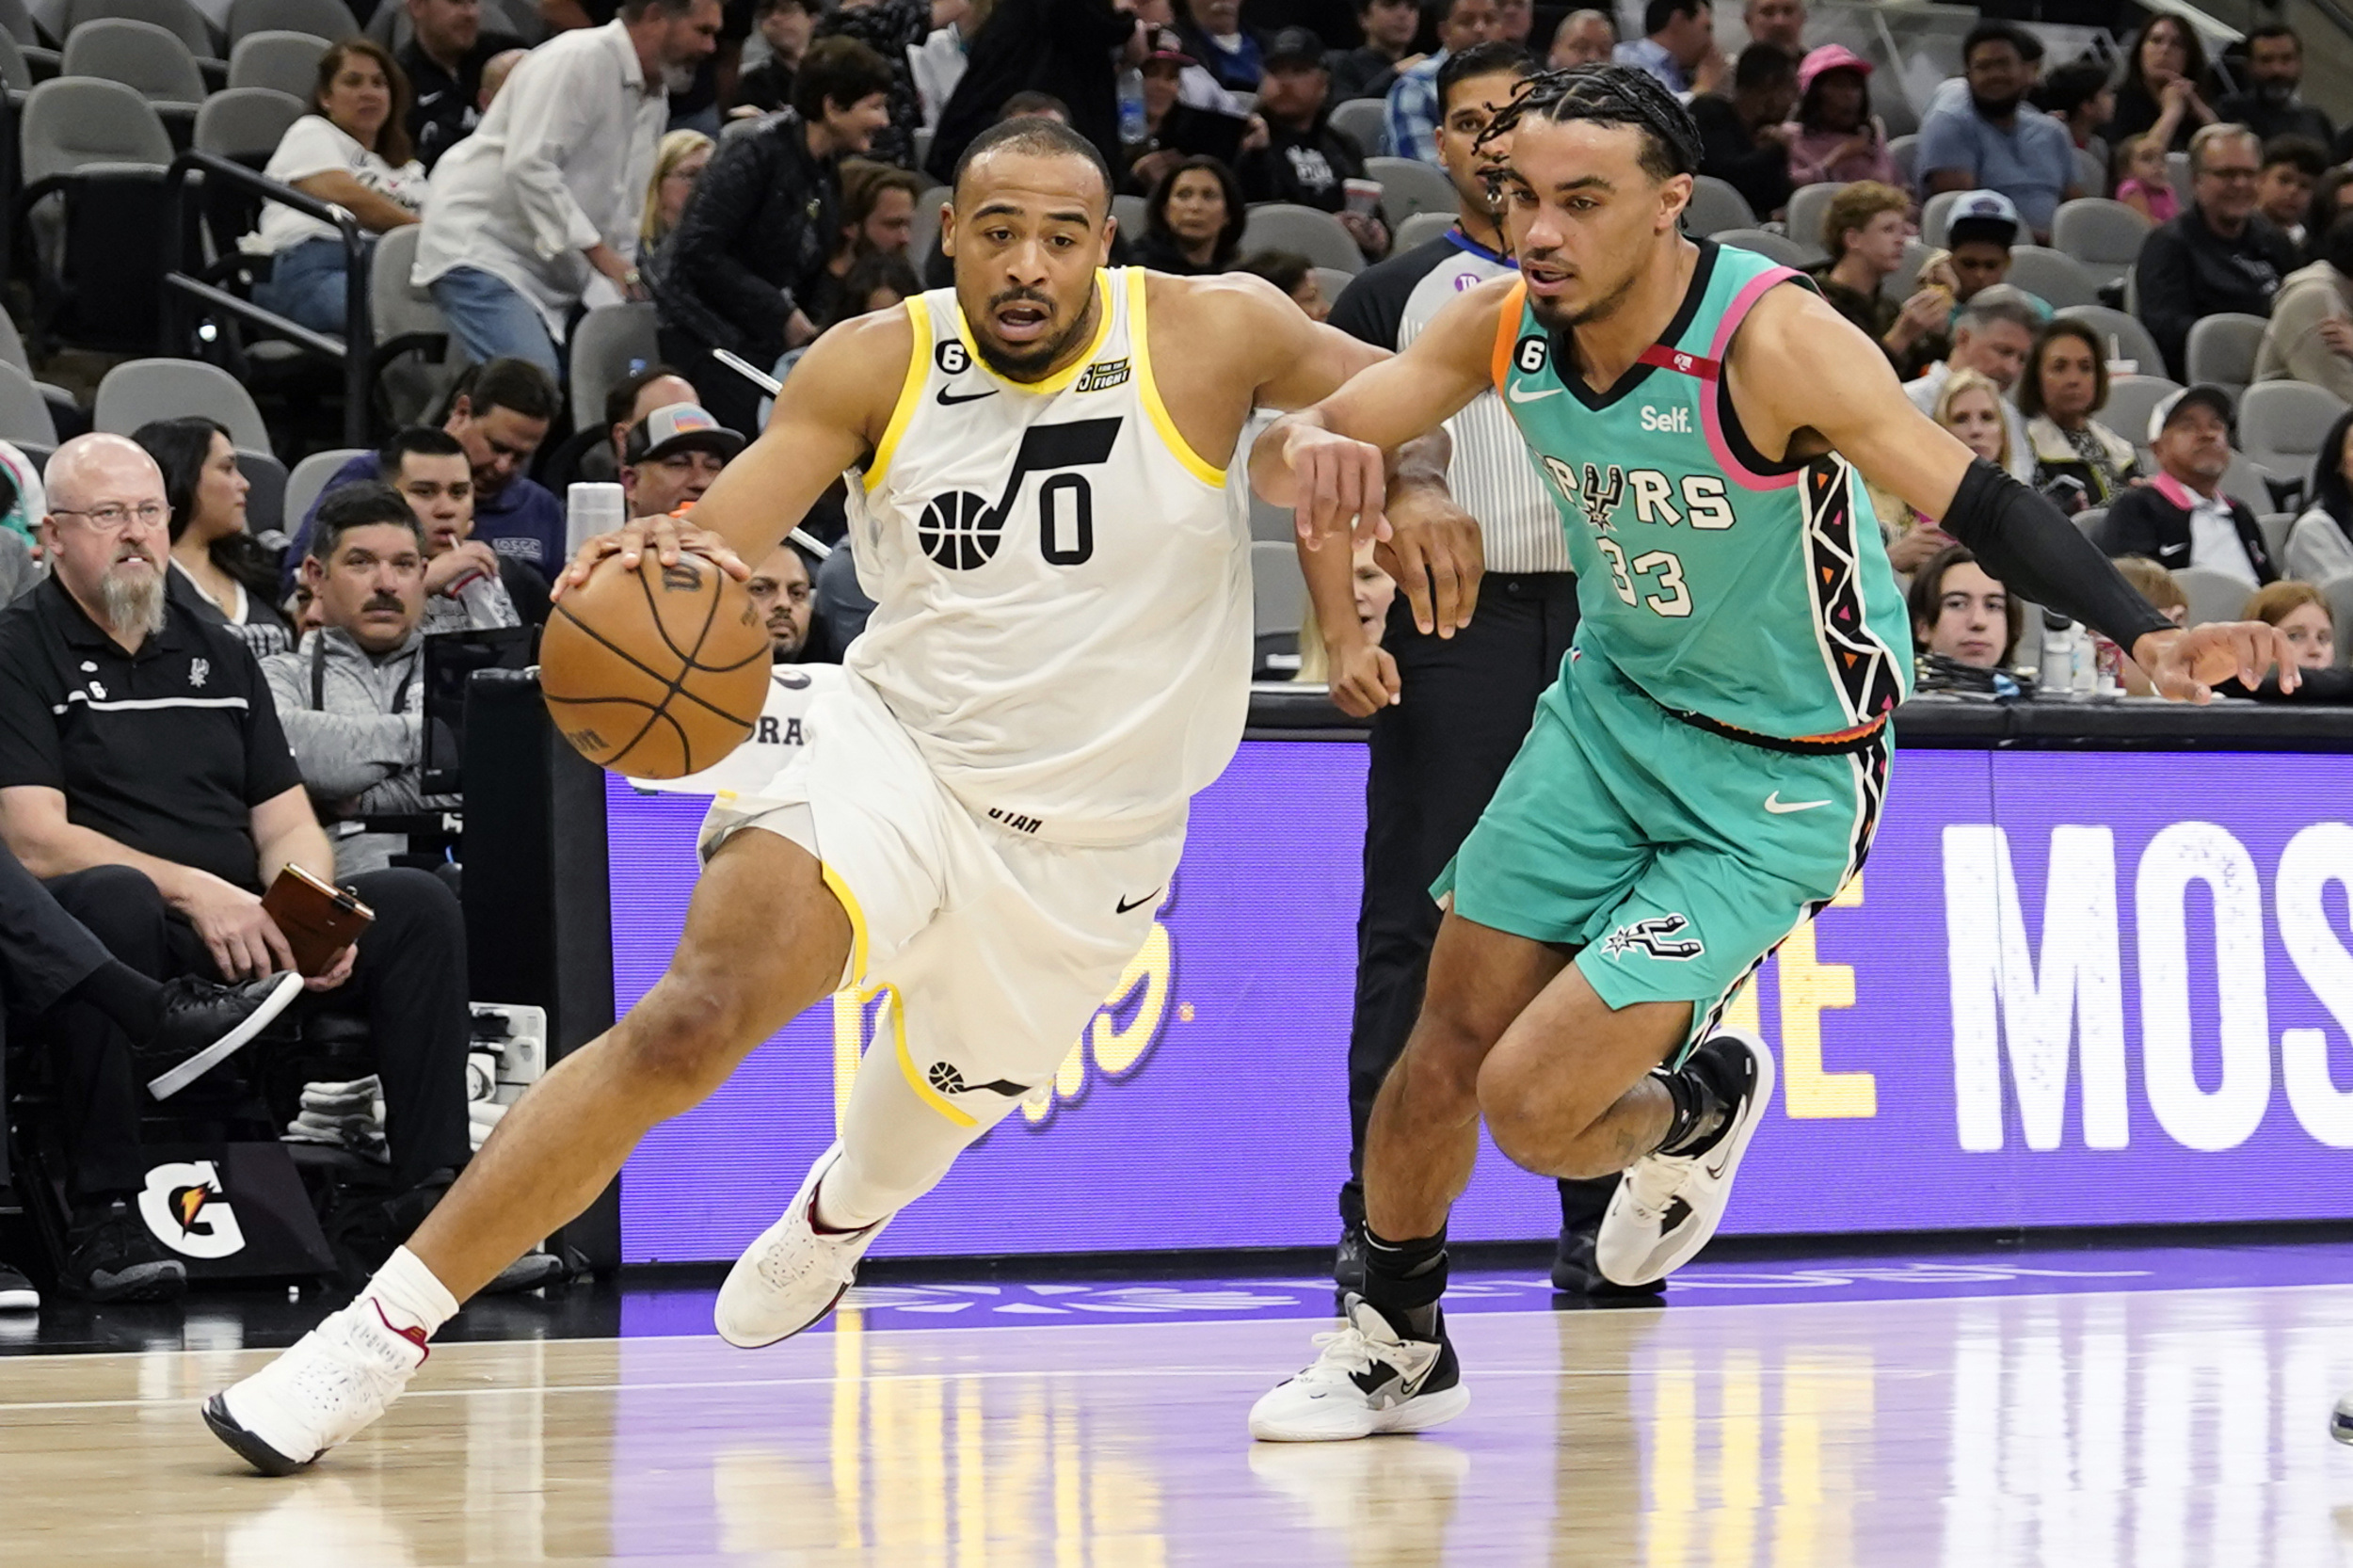 HBTJ Newsletter: Taking a look at Talen Horton-Tucker, Jazz+, and more